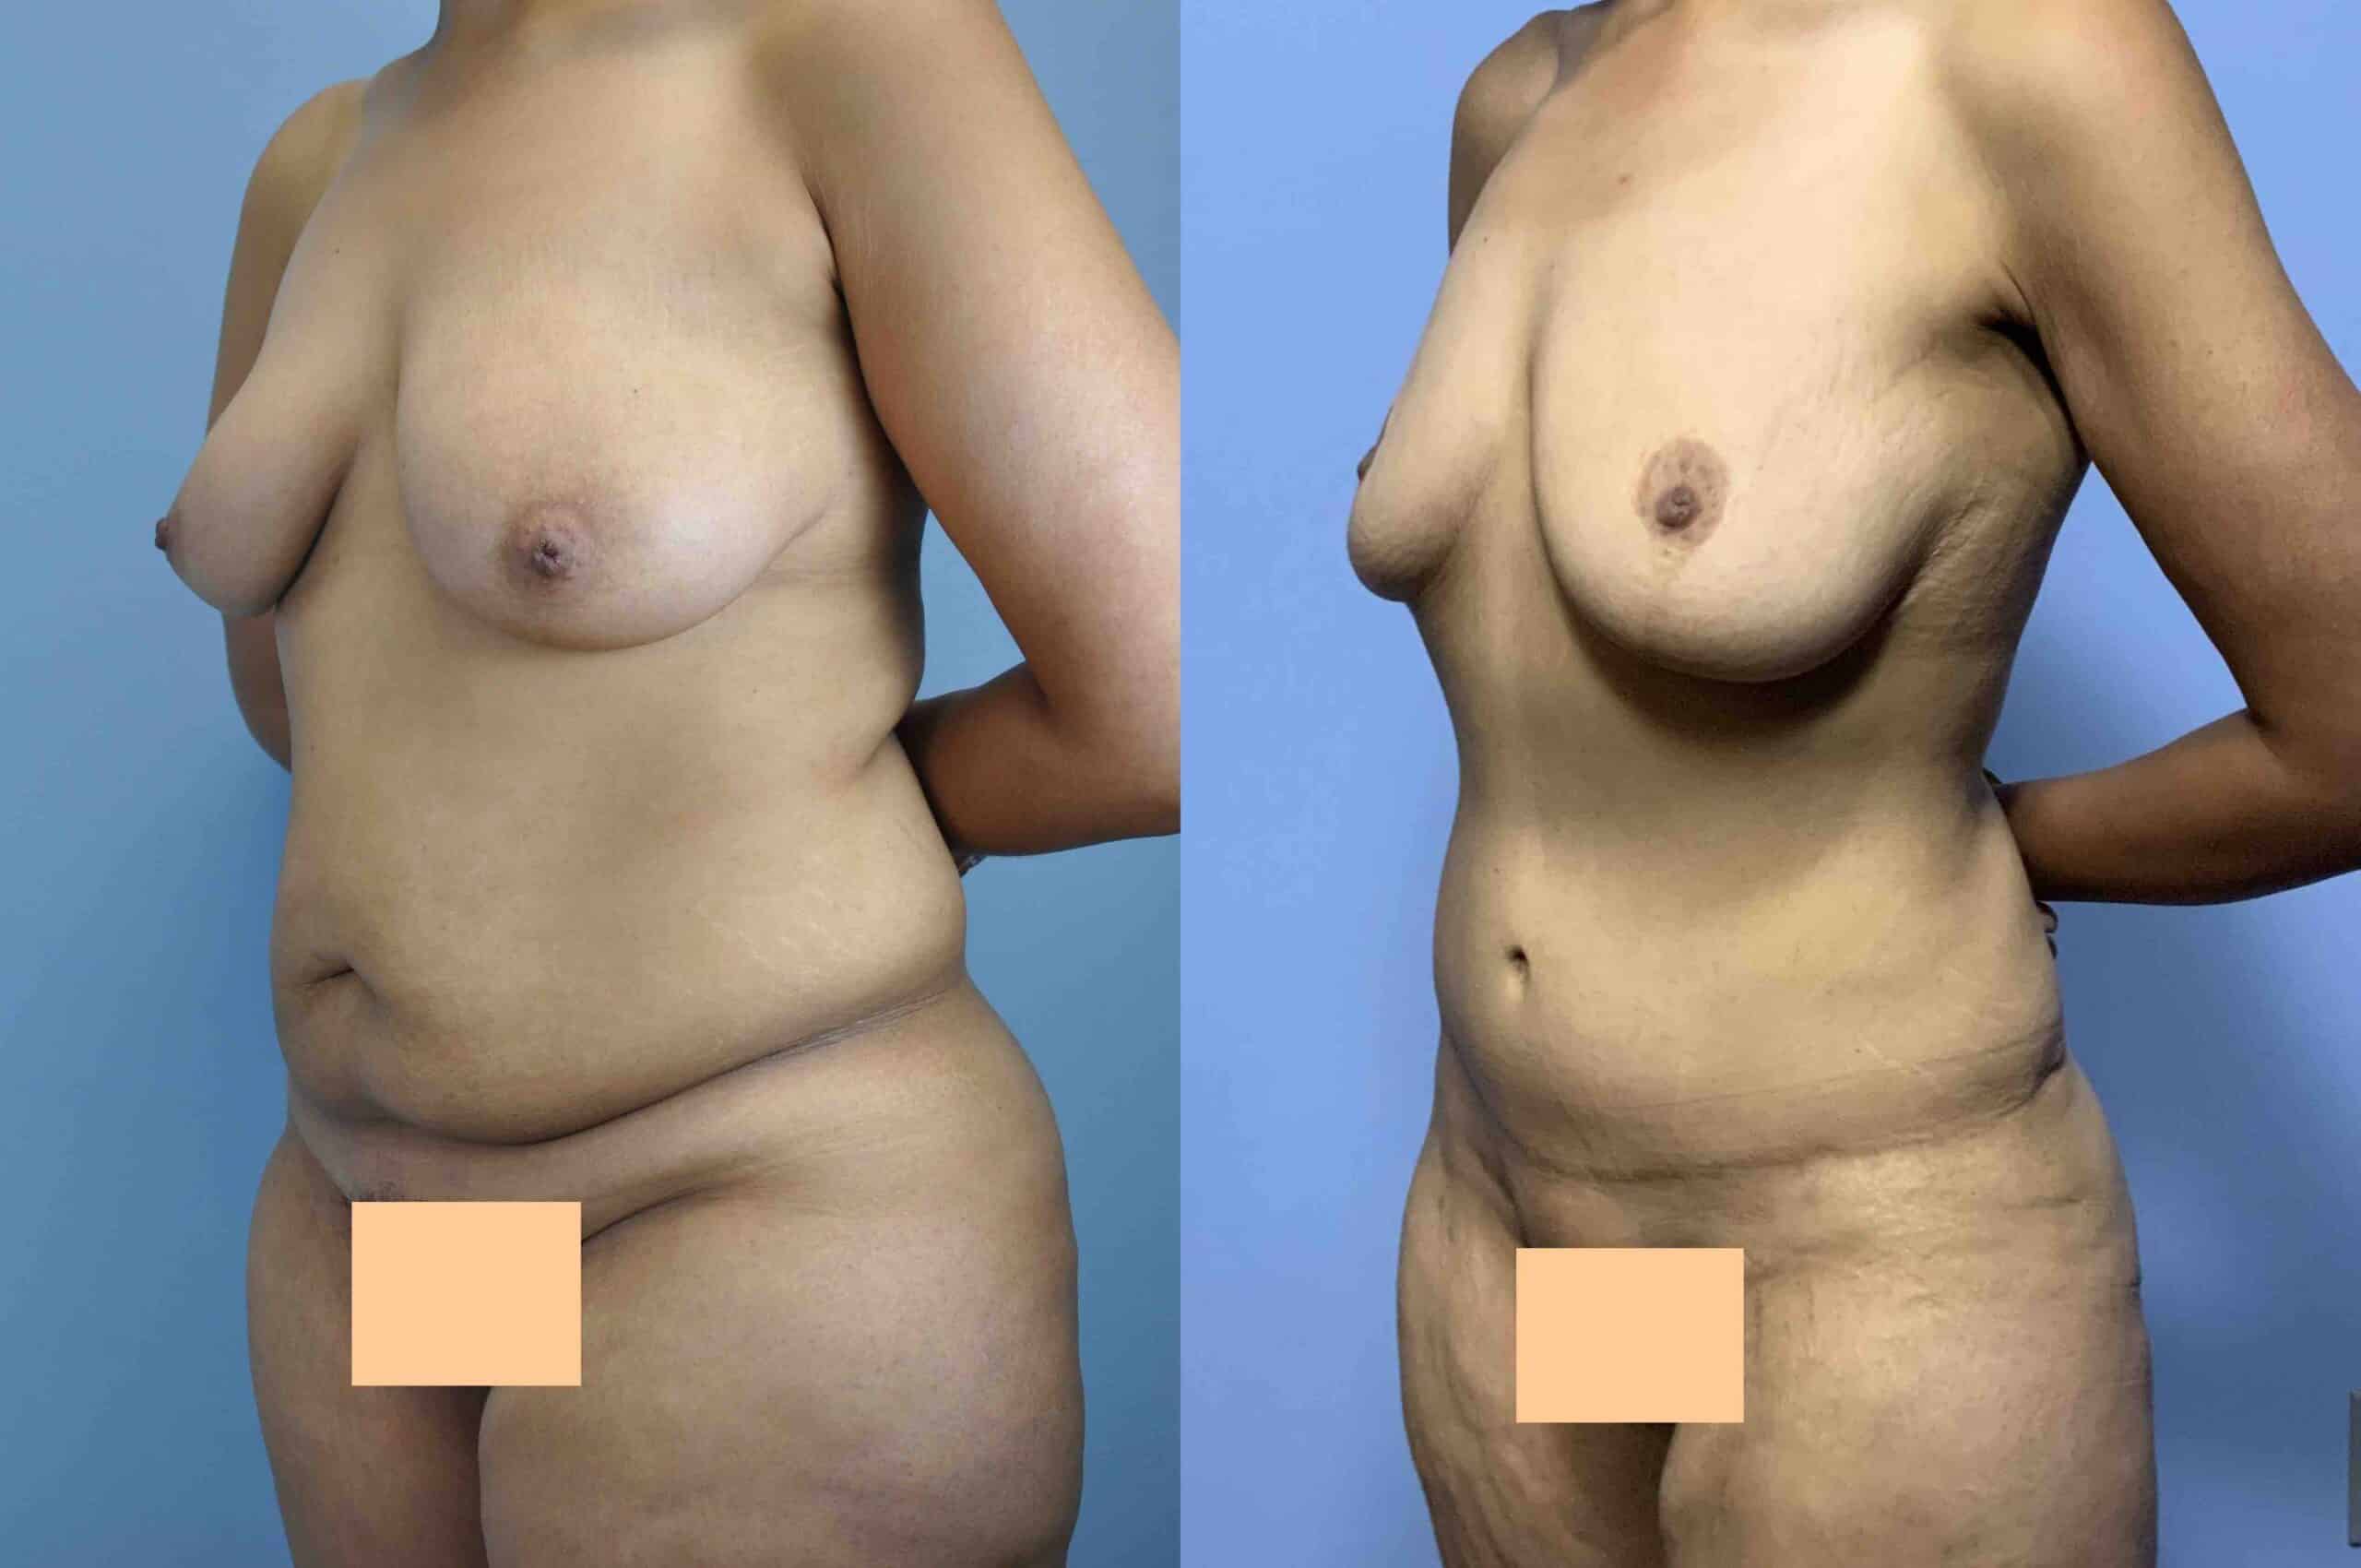 Before and after, 7 yr post op from Tummy Tuck, VASER Abdomen, Flanks, and Back, Mastopexy/Breast Lift performed by Dr. Paul Vanek (diagonal view)